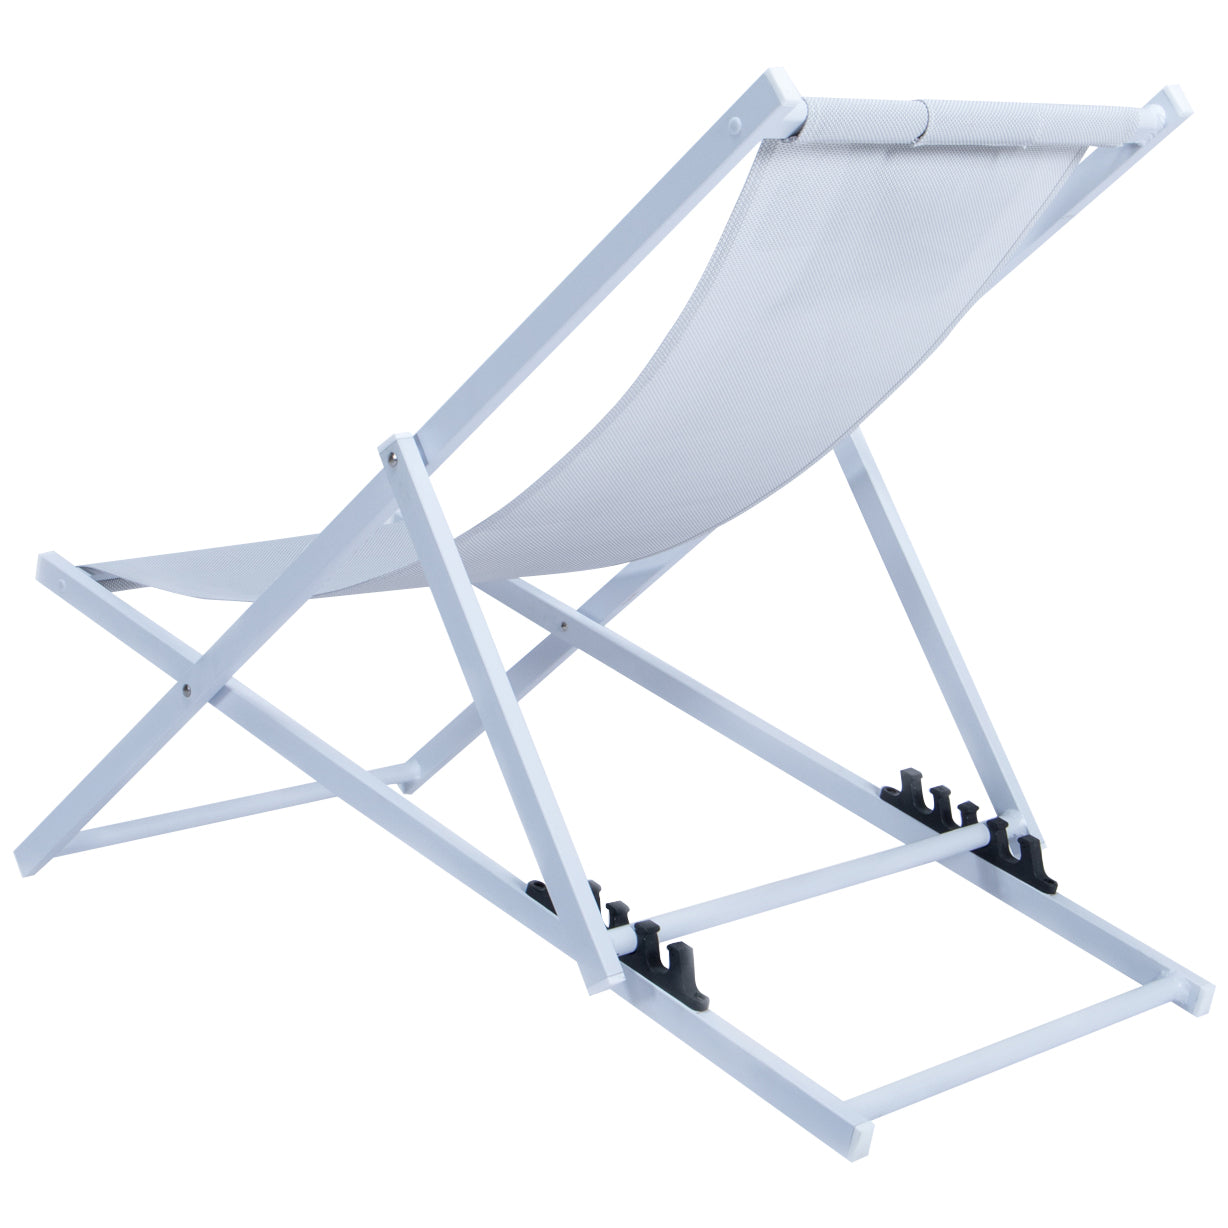 Sunny Outdoor Sling Lounge Chair